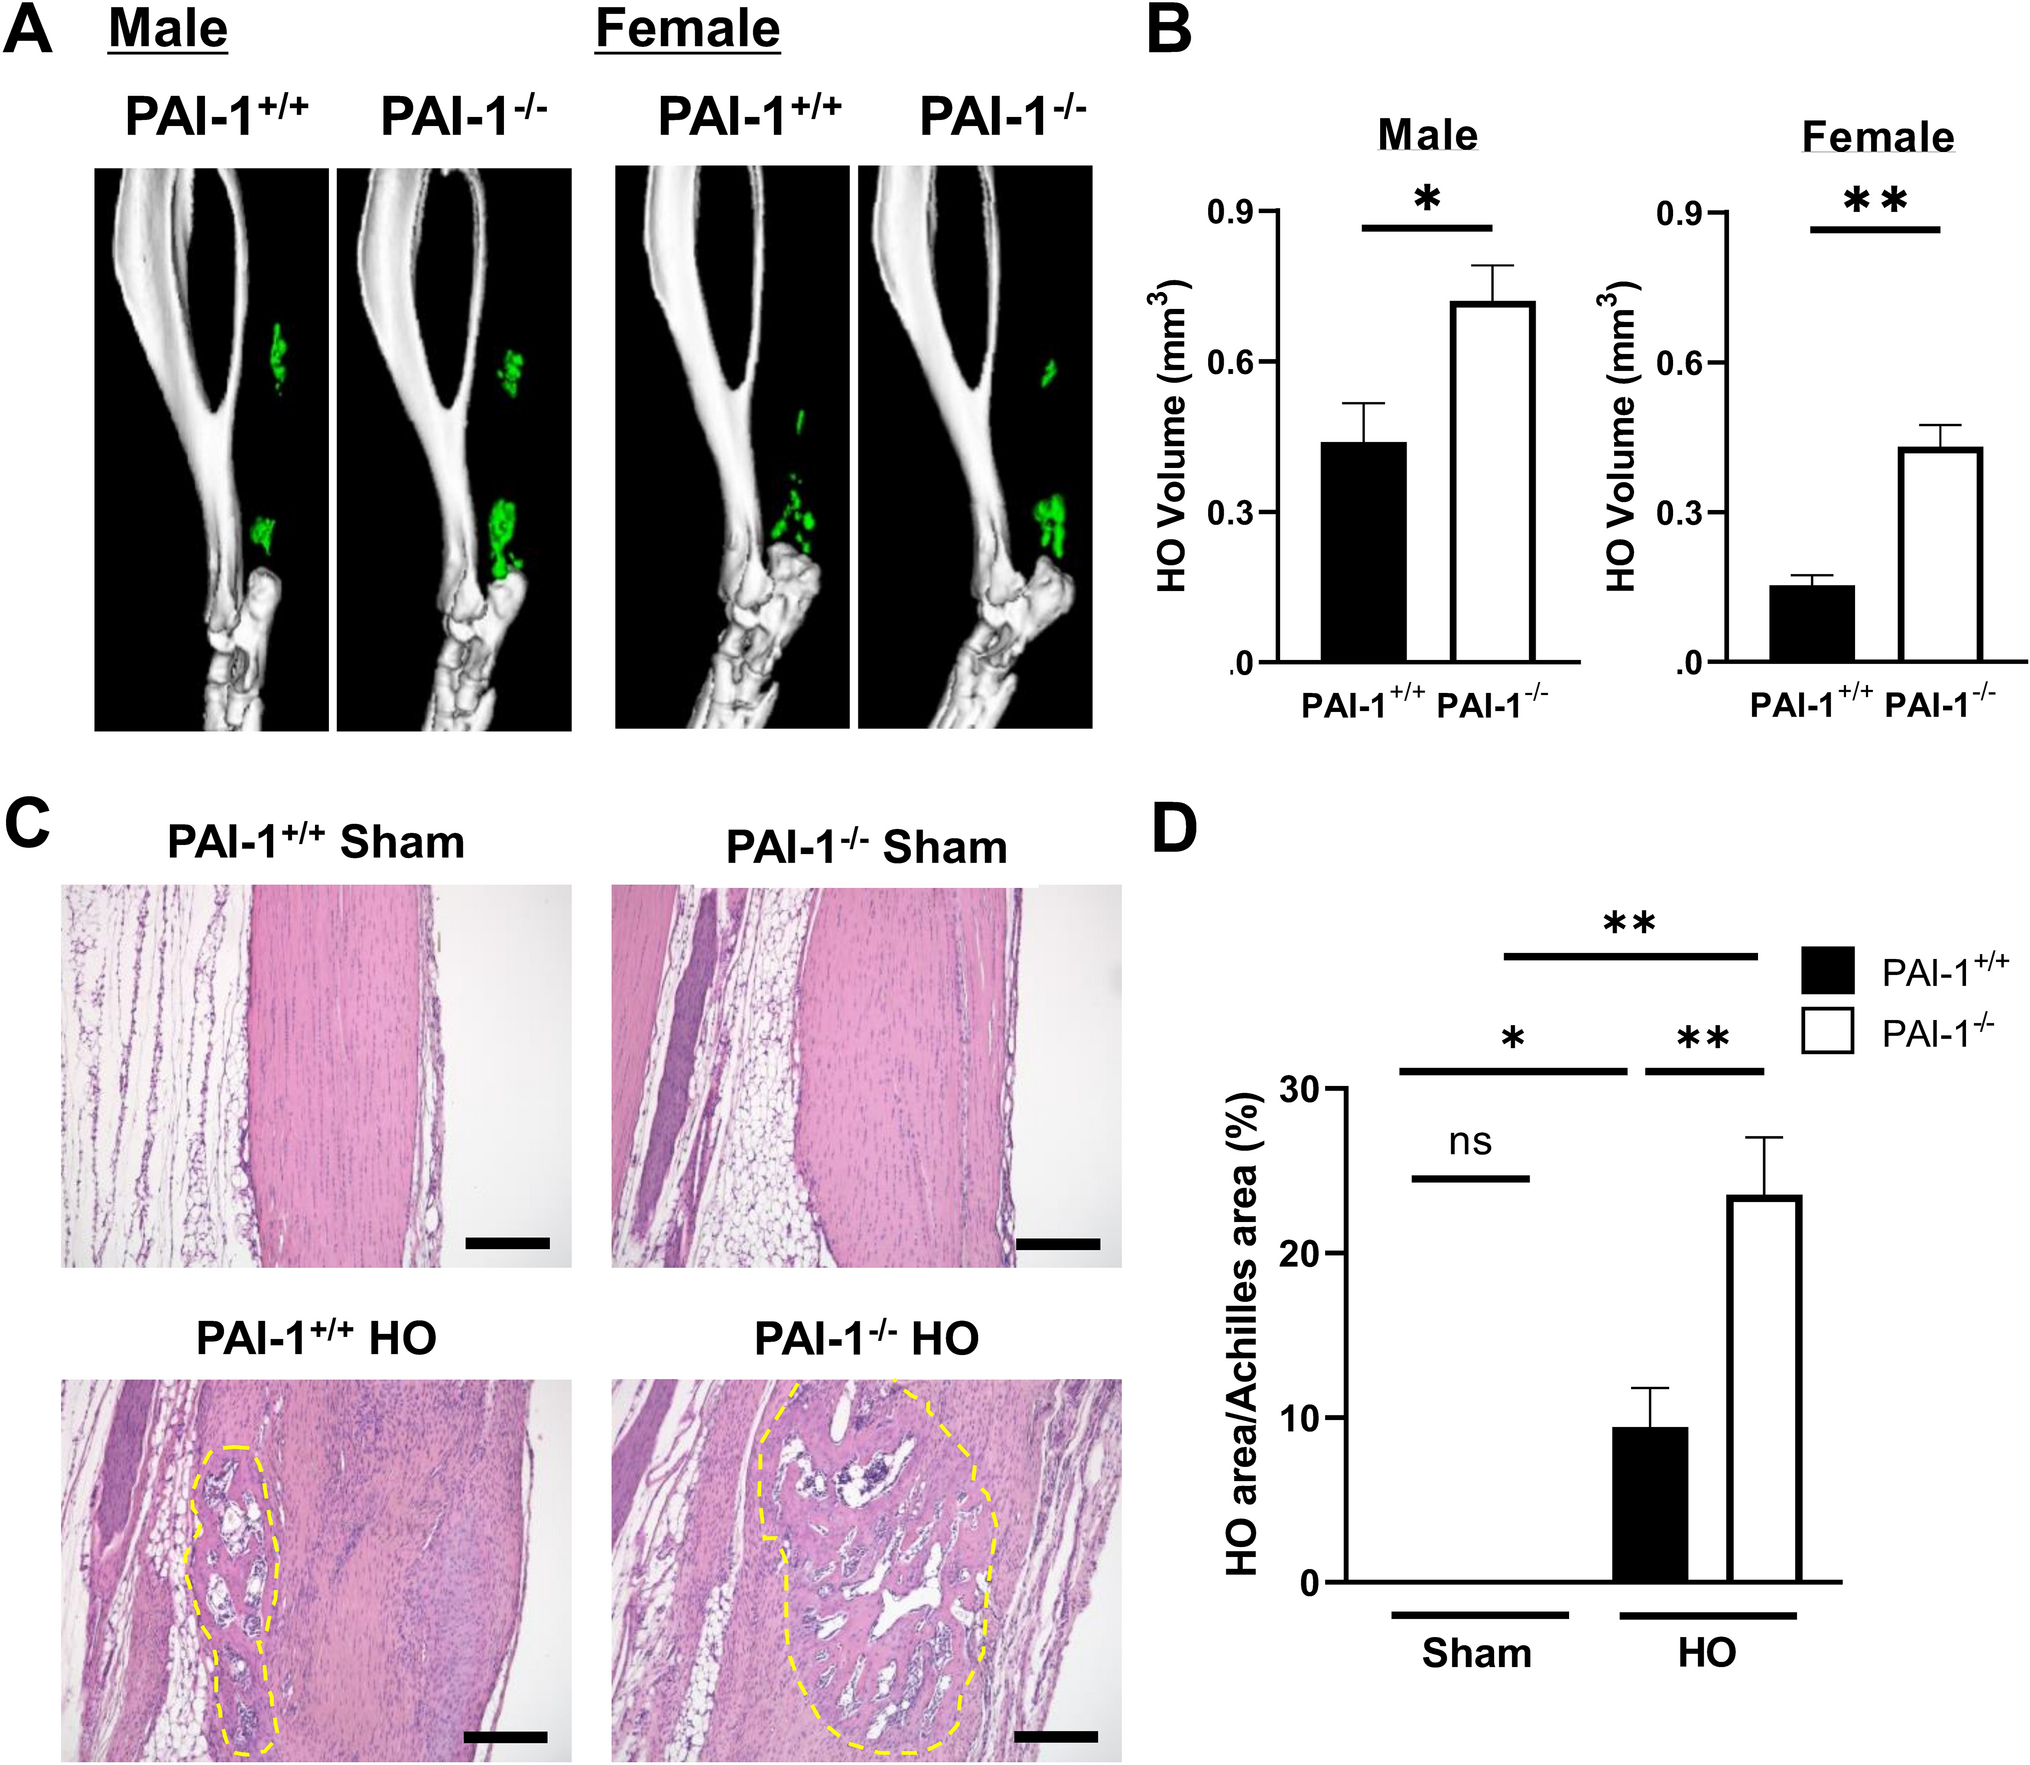 Roles of Plasminogen Activator Inhibitor-1 in Heterotopic Ossification Induced by Achilles Tenotomy in Thermal Injured Mice